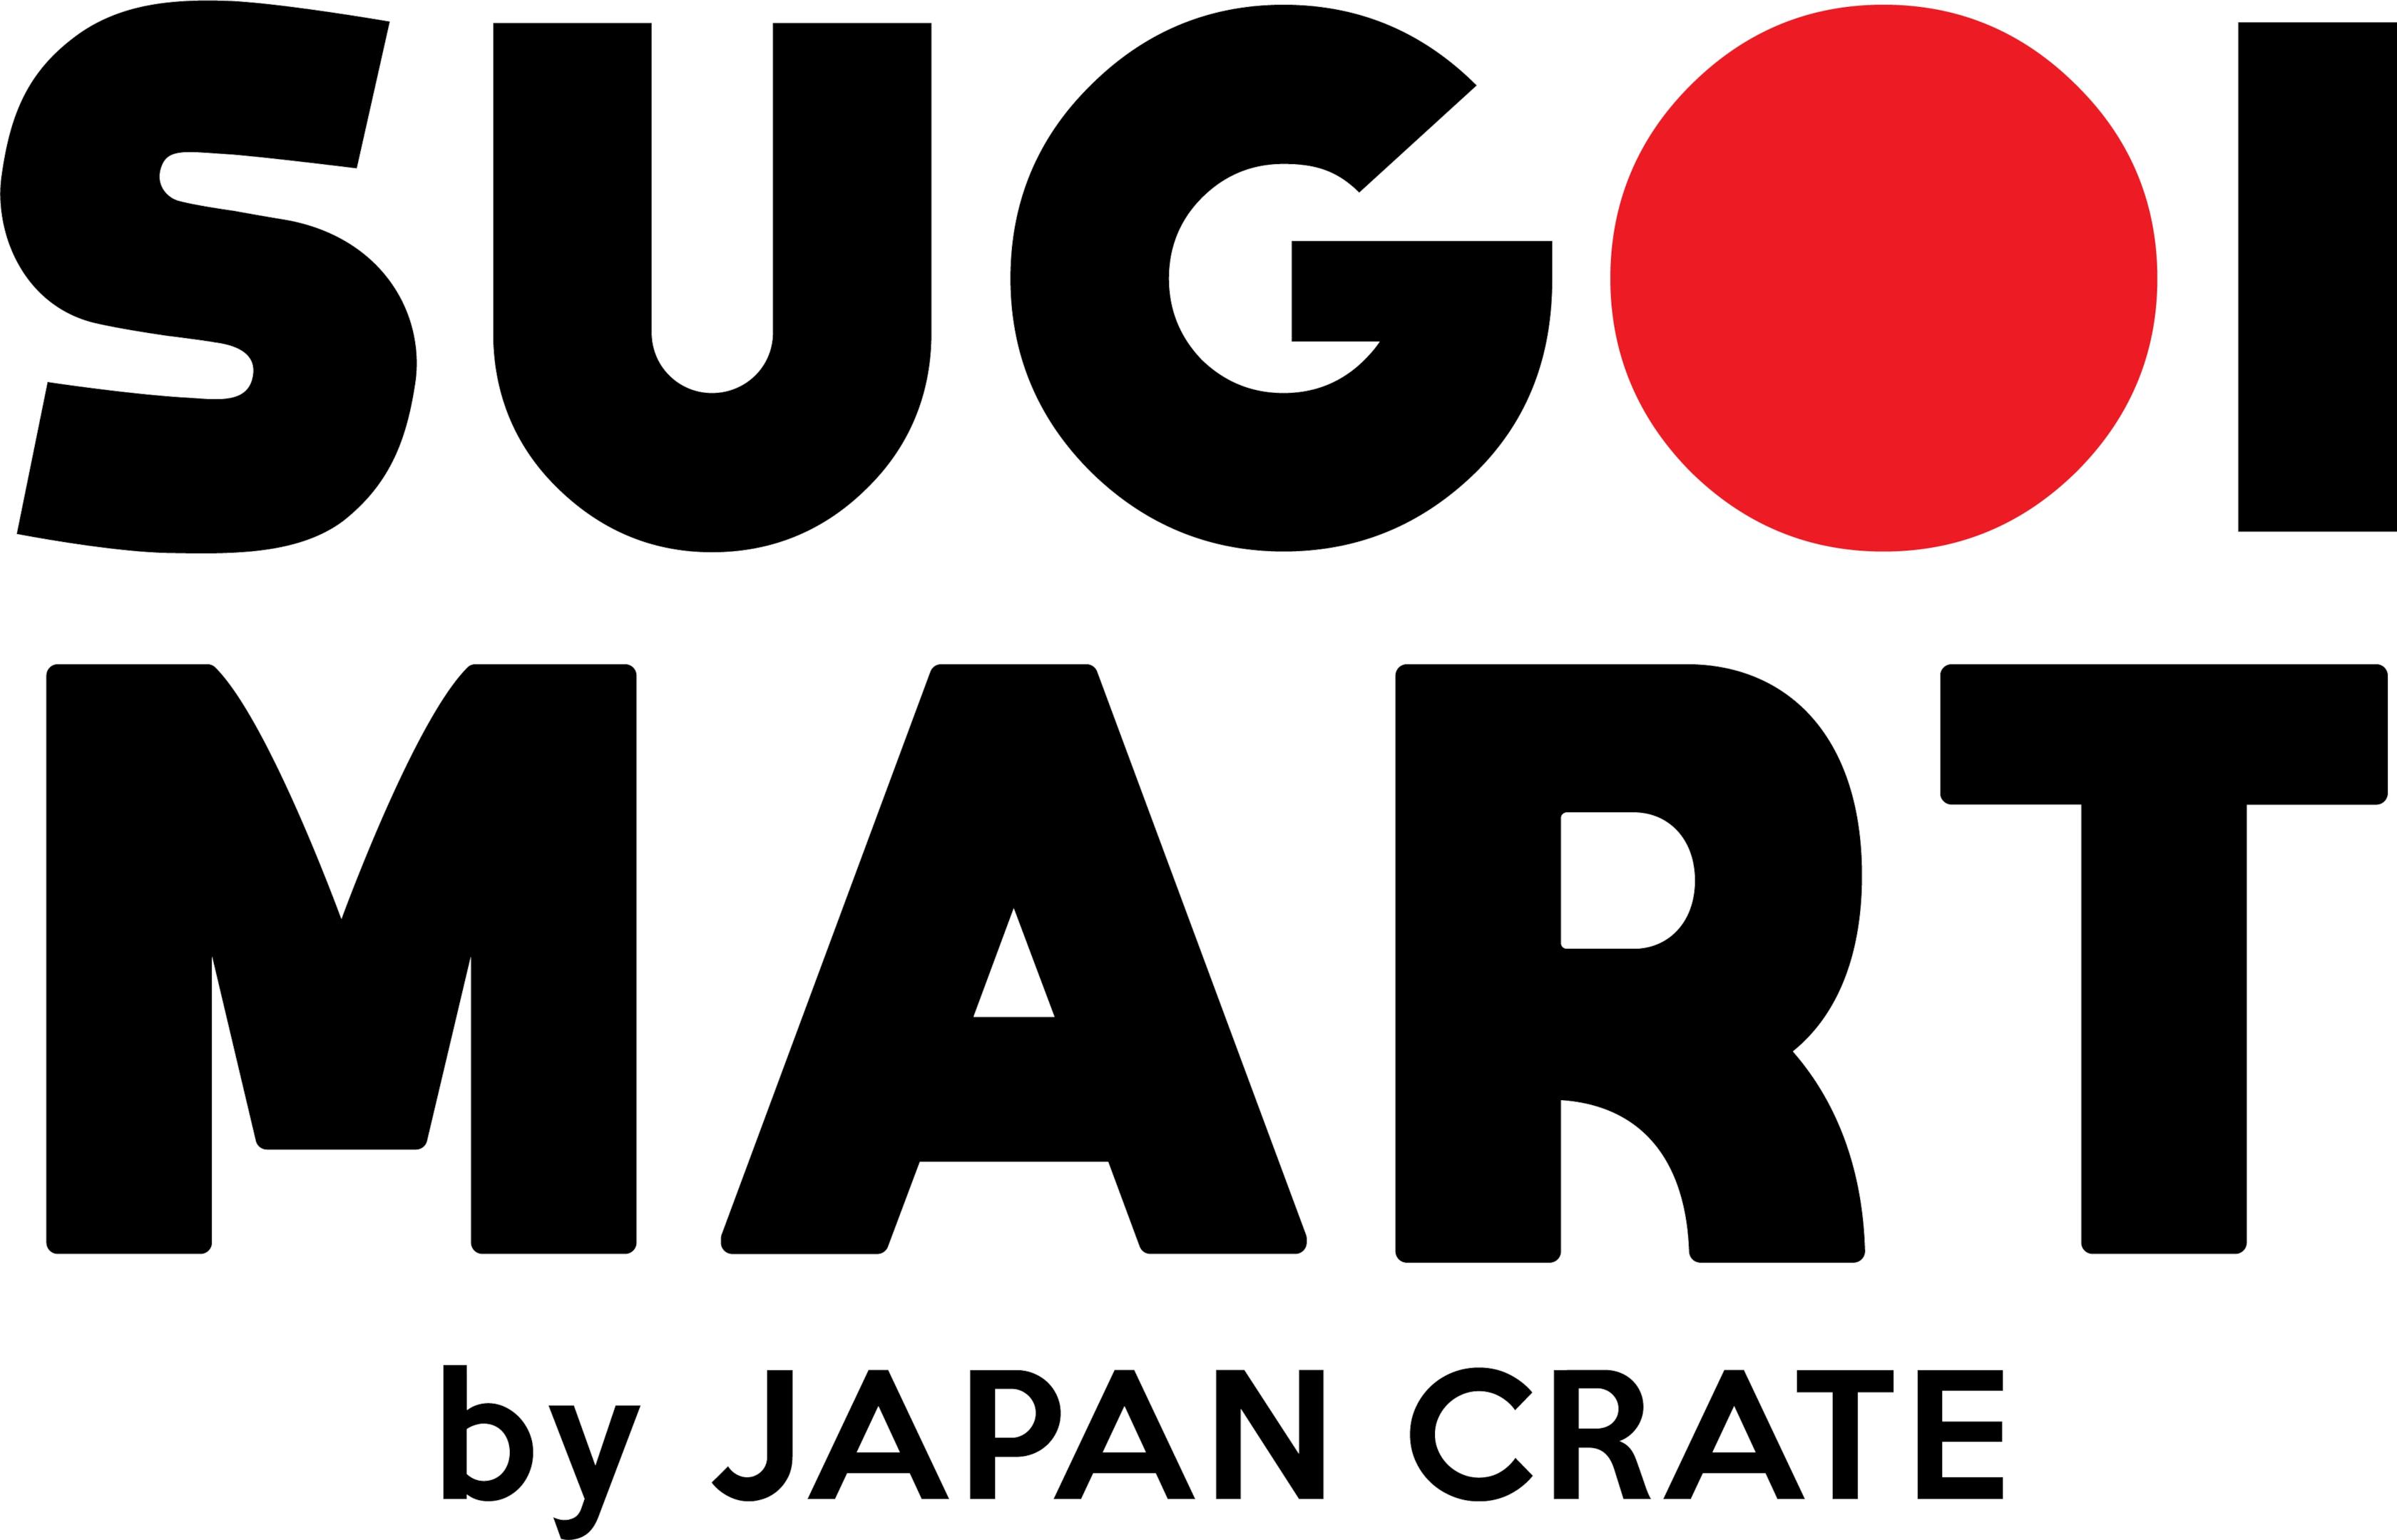 Sugoi Mart by Japan Crate (logo)